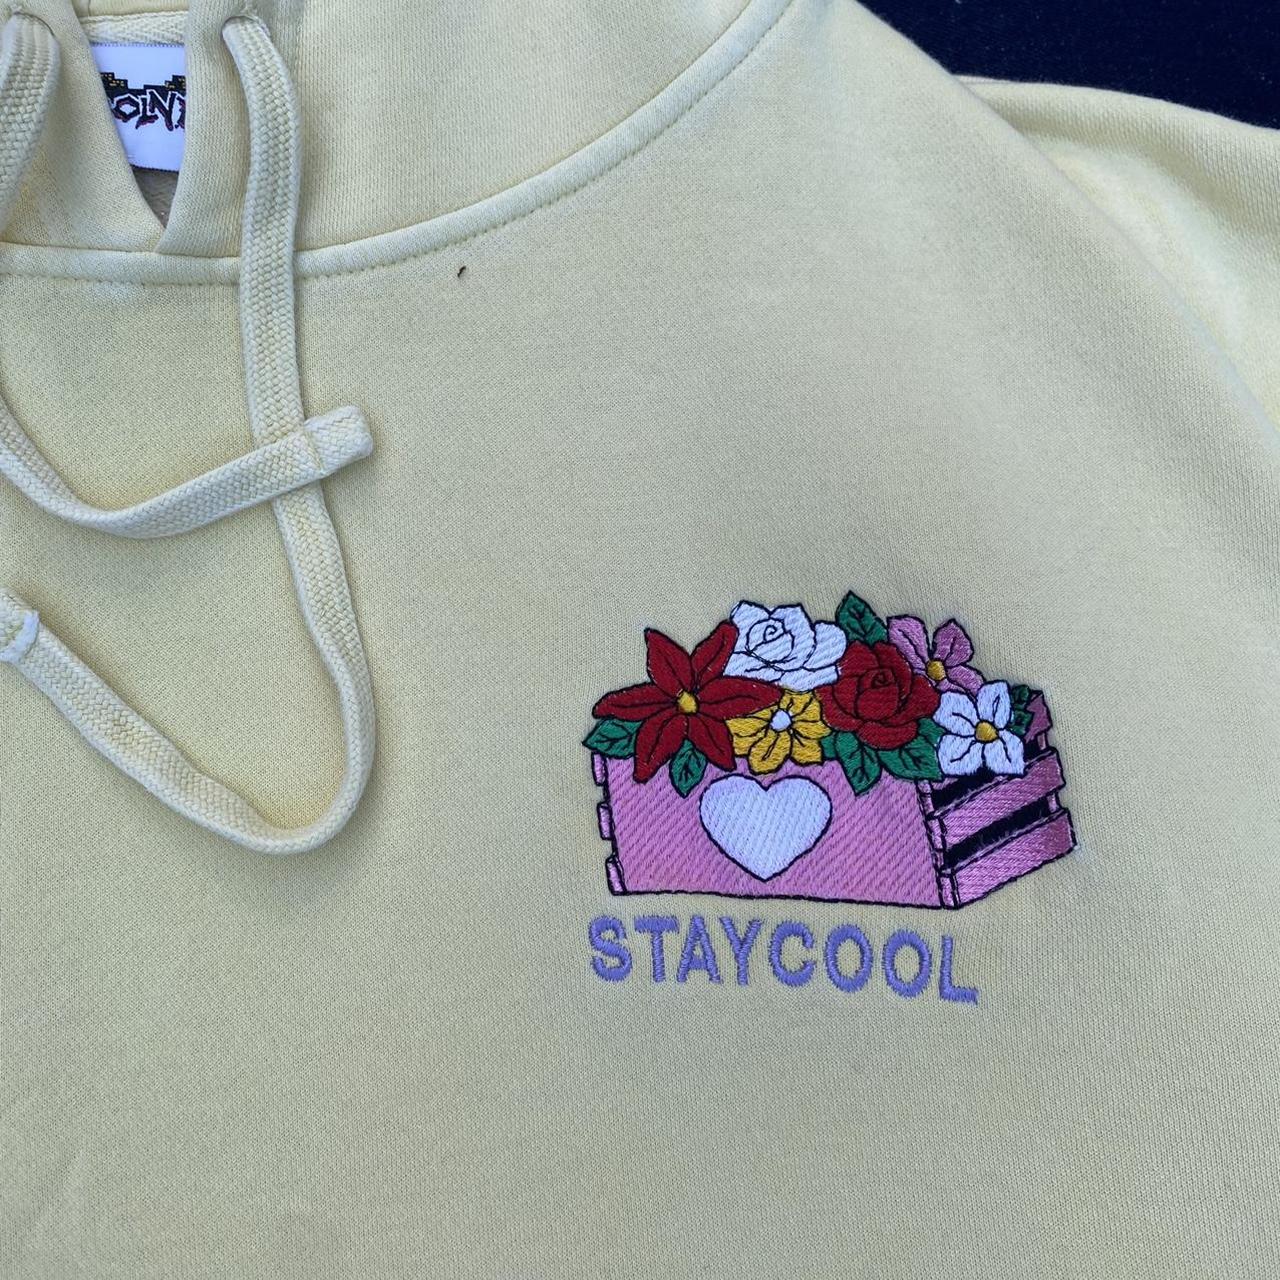 STAY COOL NYC Men's Yellow and Cream Hoodie (2)